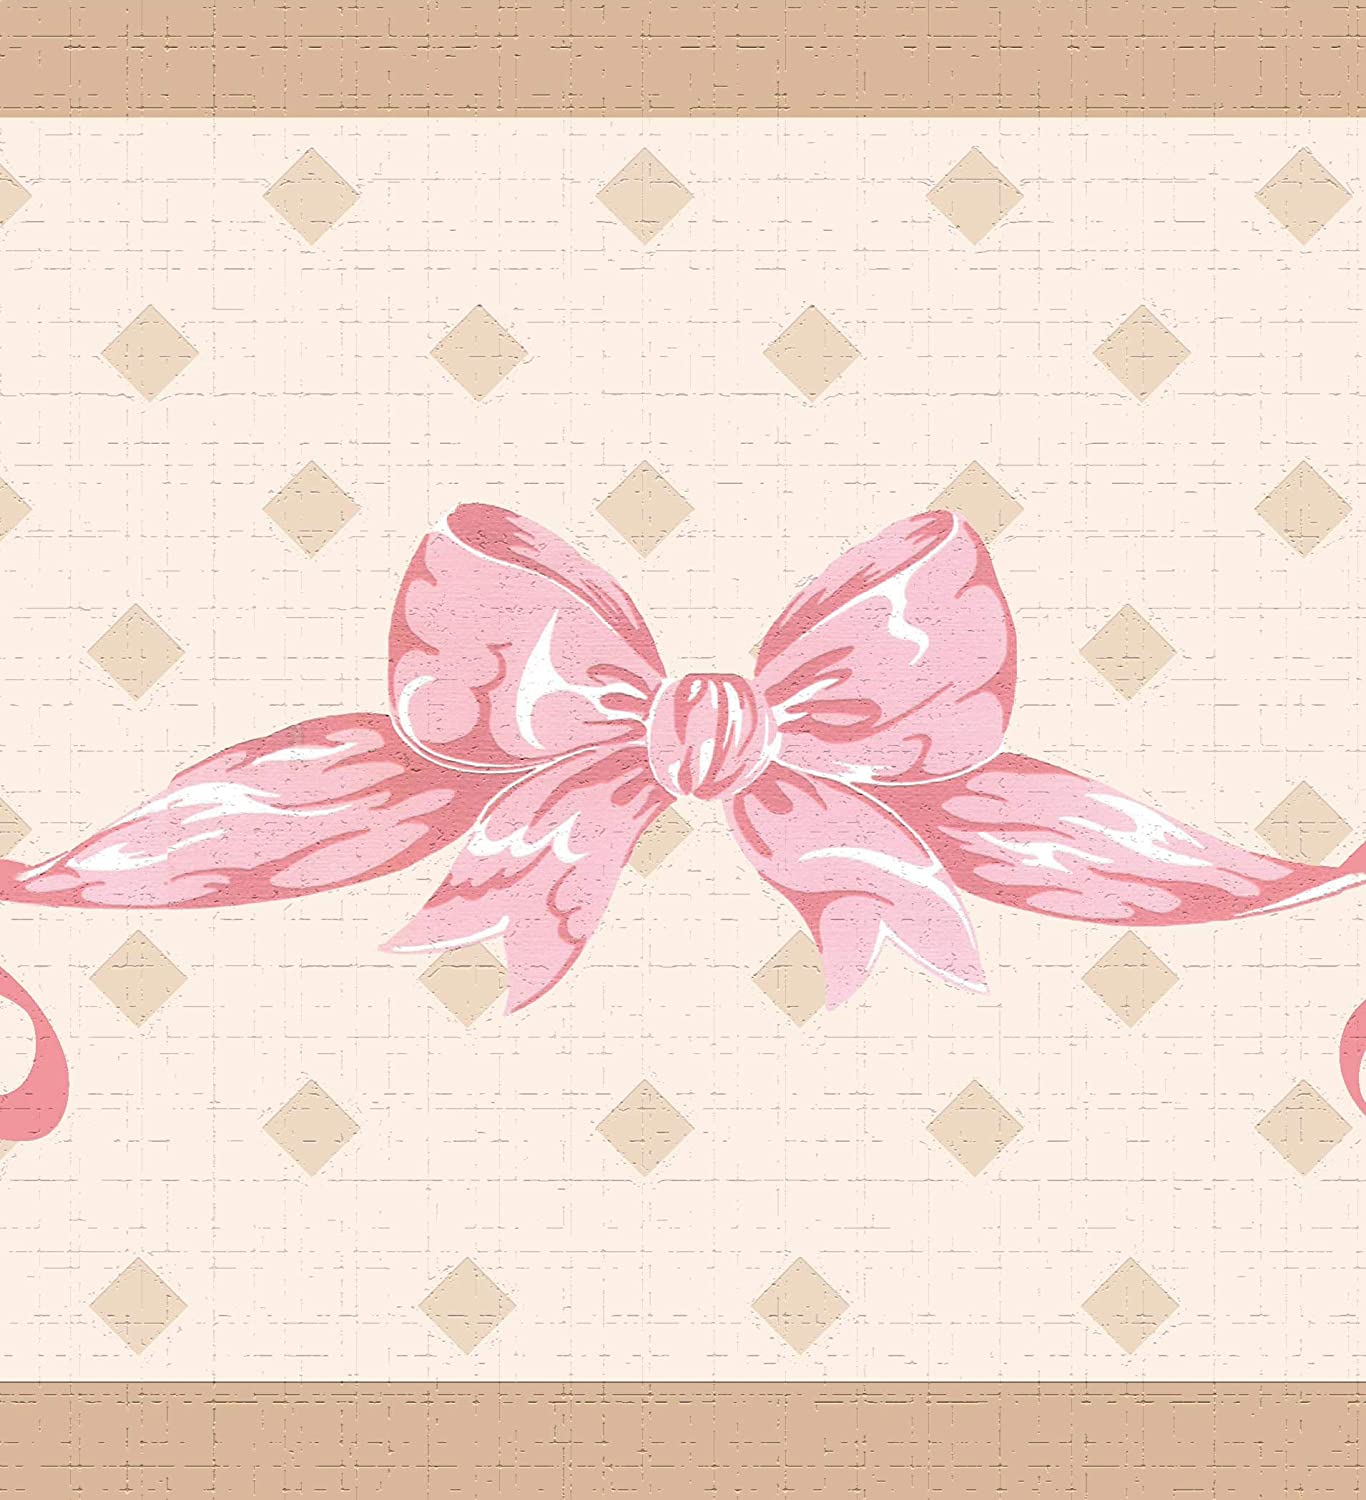 Dundee Deco DDAZBD9036 Peel and Stick Wallpaper Border Pink Bow Tie, Ribbons Wall Border Retro Design, 15 ft x 7 in (4.57m x 17.78cm), Self Adhesive